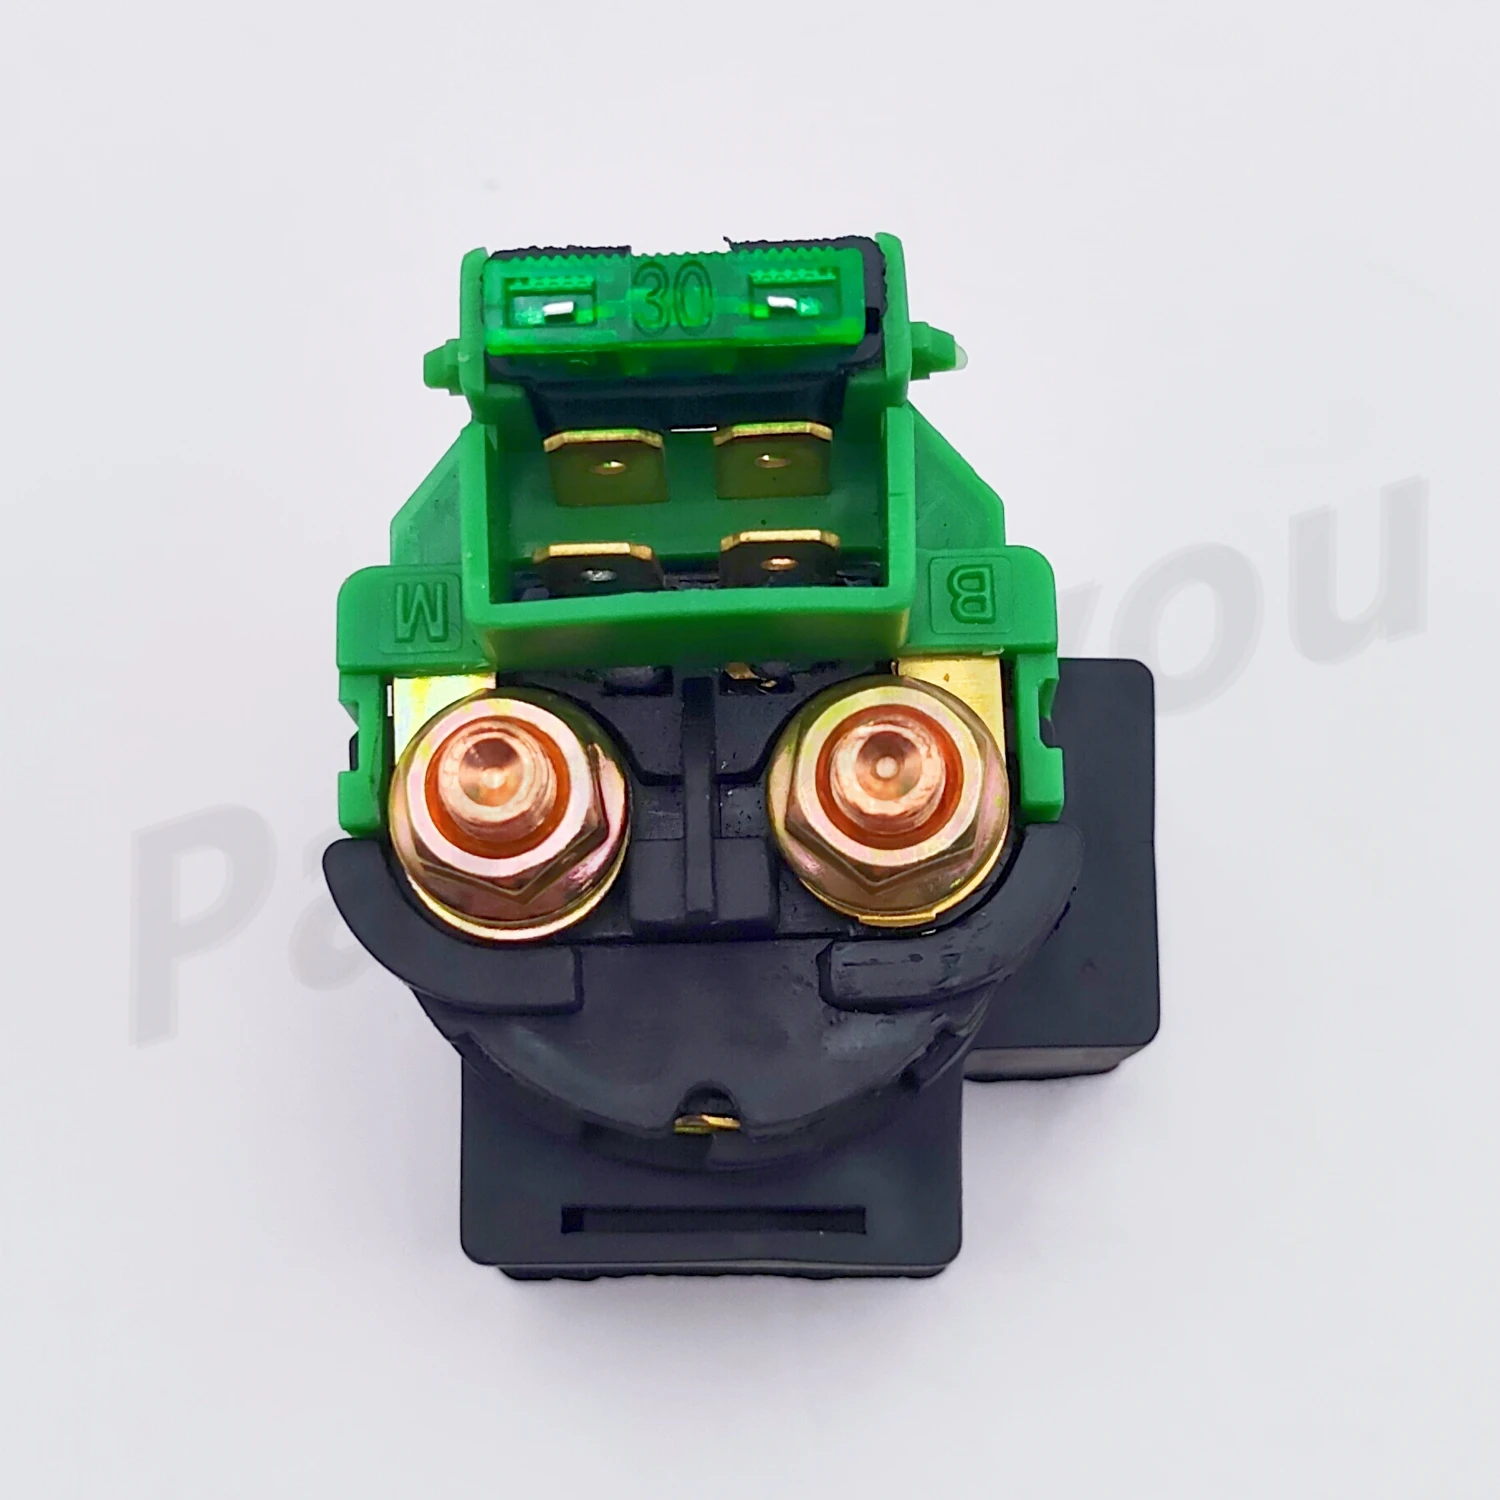 Solenoid Starter Relay for CFmoto 450 500 520 550 600 800 850 1000 X5 X6 X8 Z6 650TR 650MT 9010-150310 901-15.03.10 31800-5000 12v winch relay solenoid replacement winch contactor solenoid relays for atv suv utv 5000 7000 lbs shatterproof winch relay